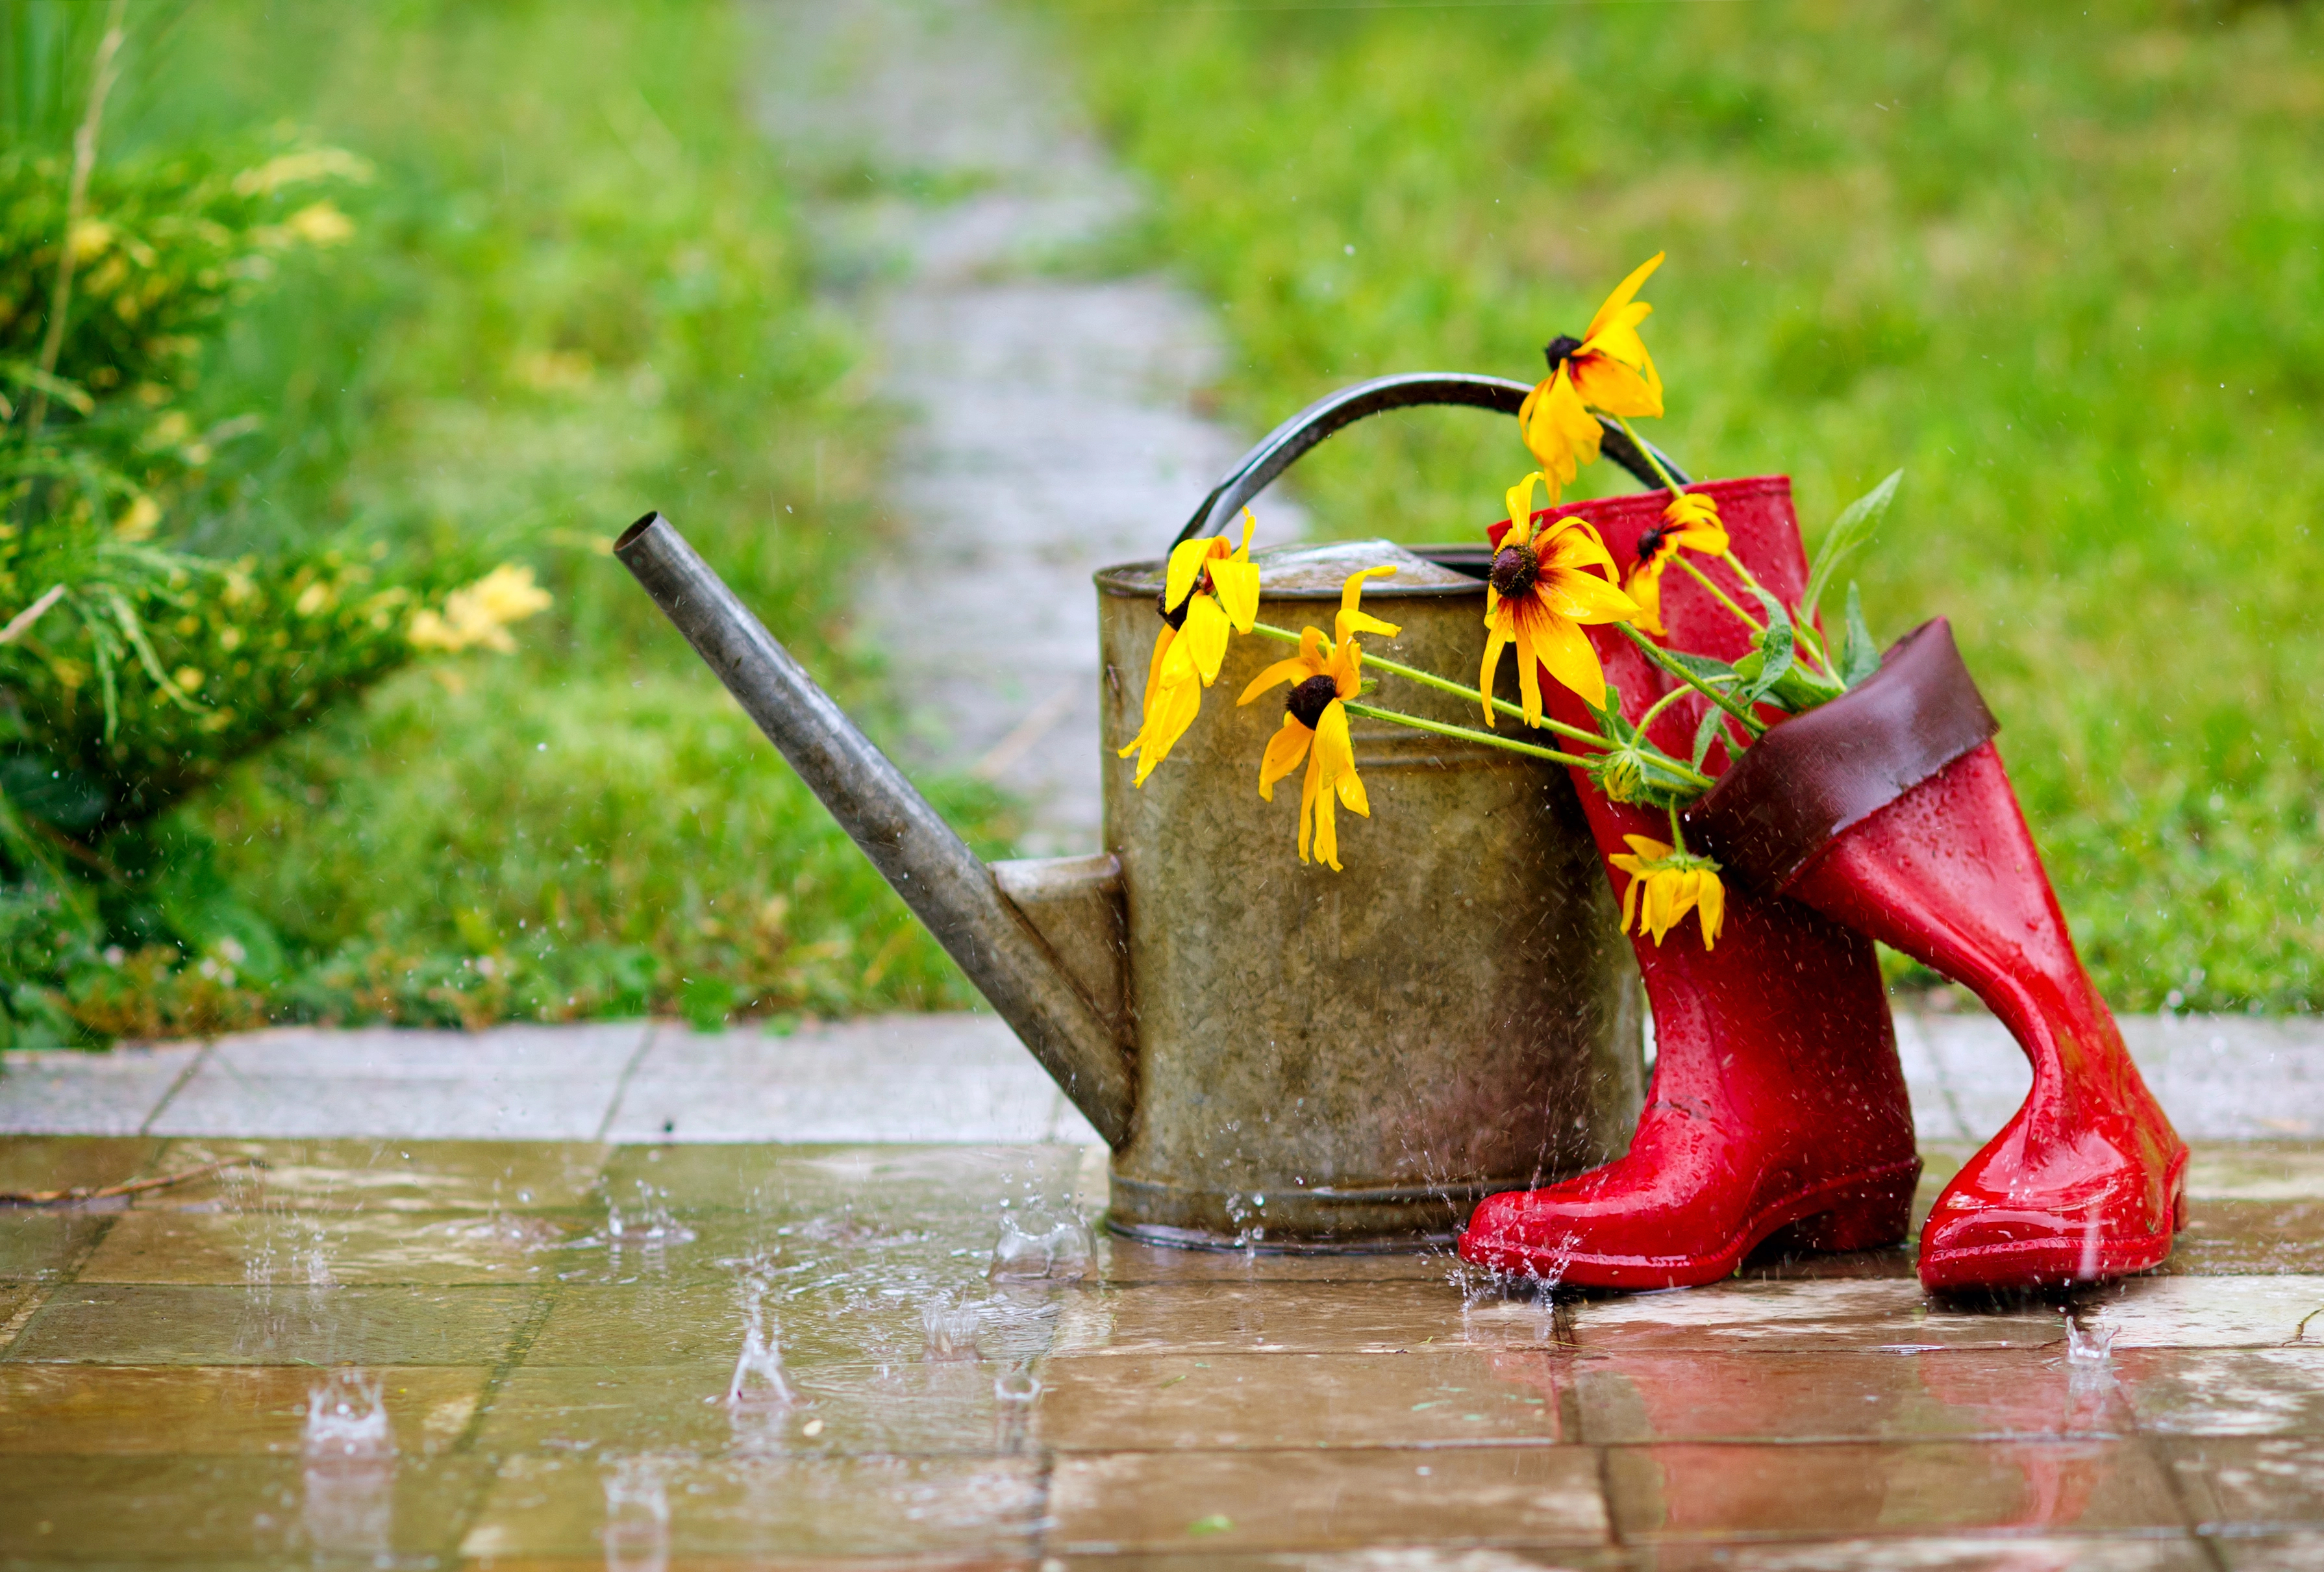 Watering can in the rain